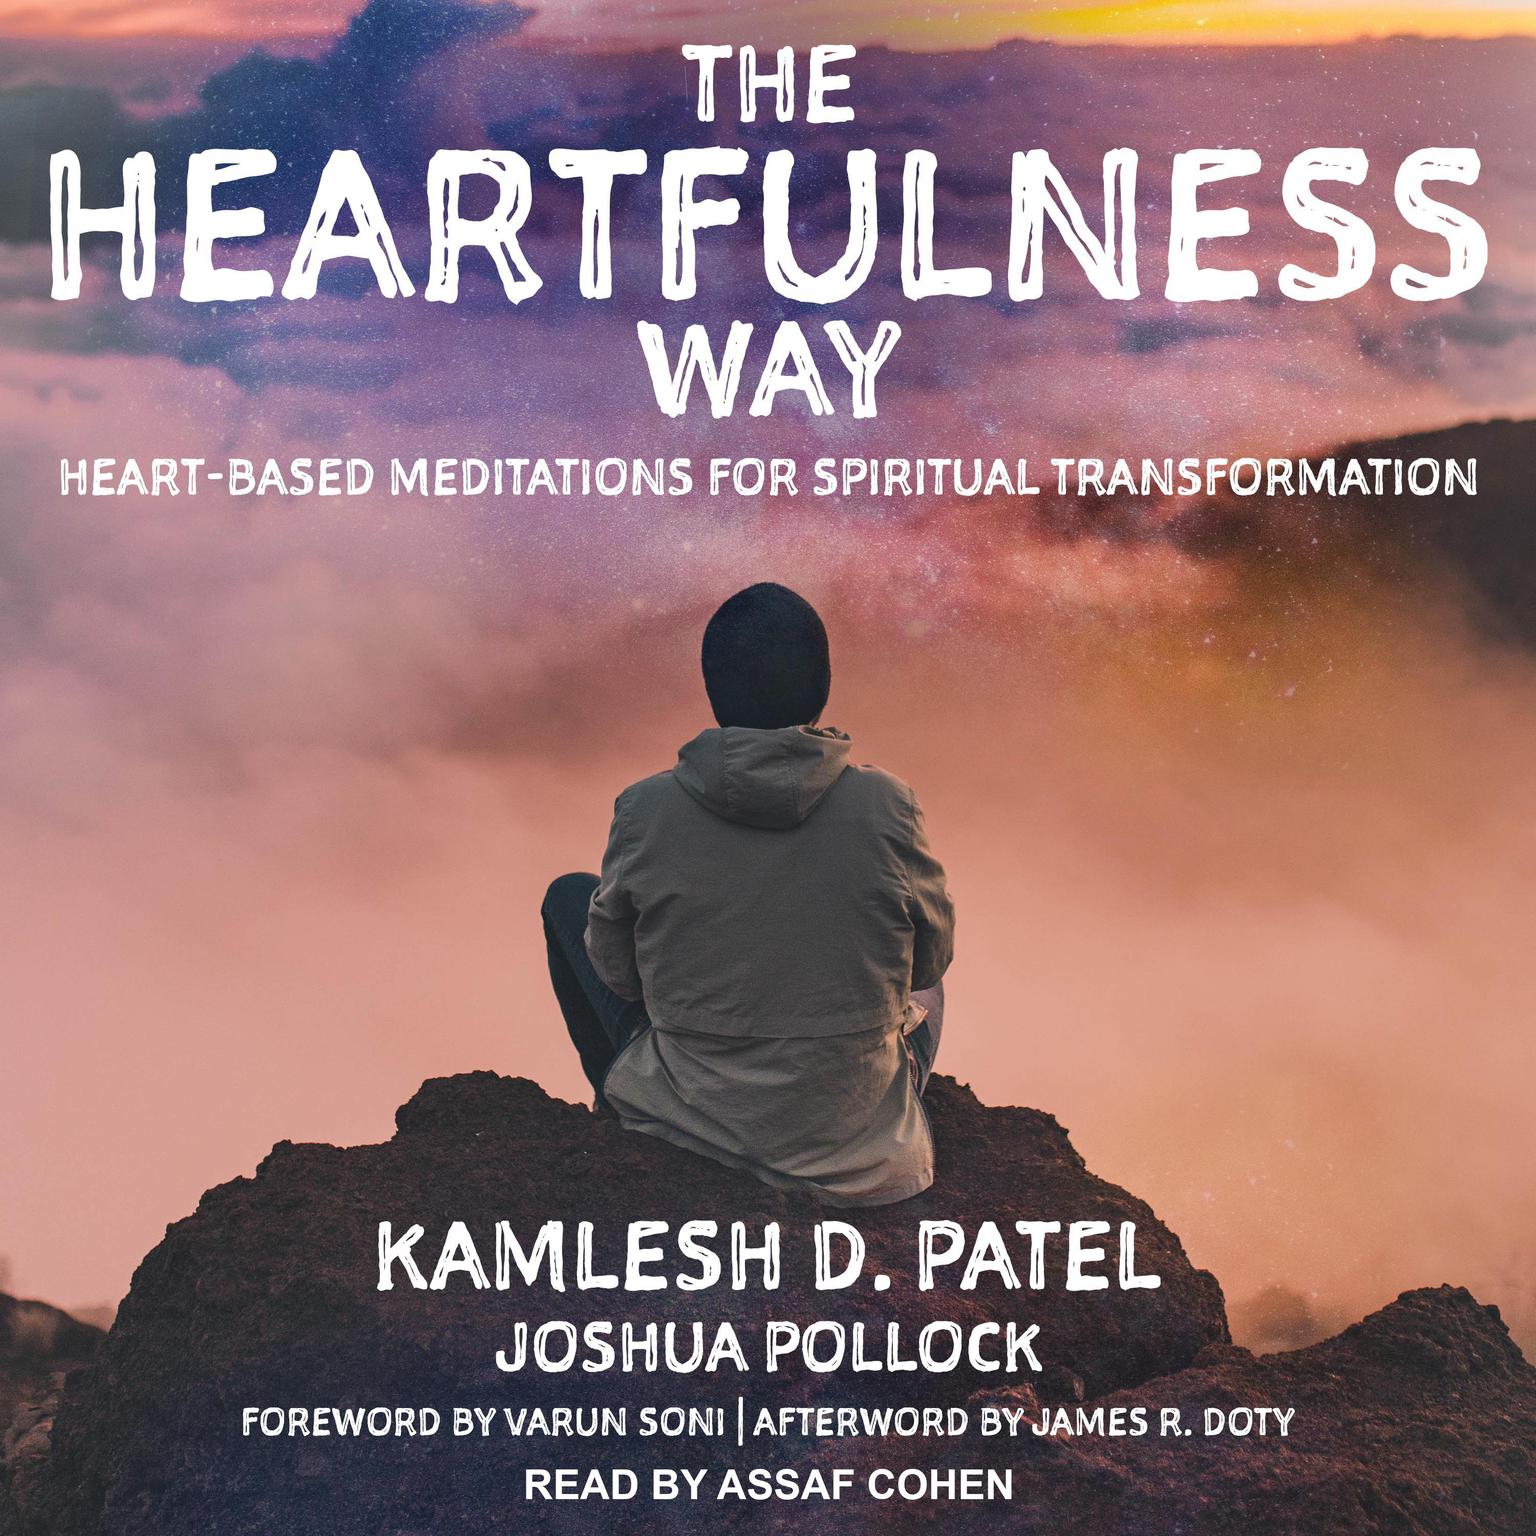 The Heartfulness Way: Heart-Based Meditations for Spiritual Transformation Audiobook, by Kamlesh D. Patel